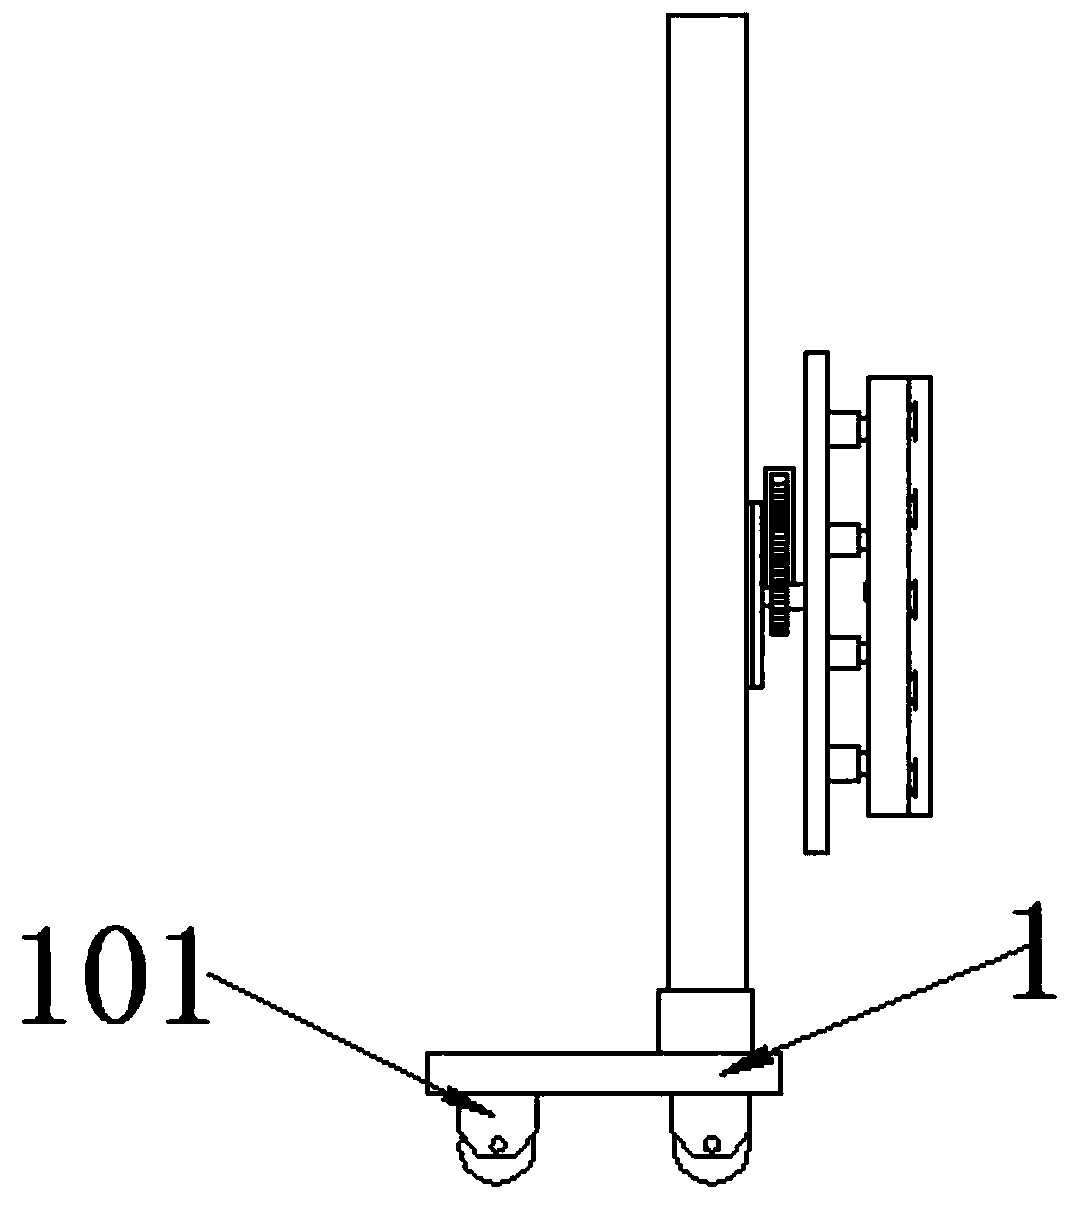 Auxiliary device and auxiliary method for building detection